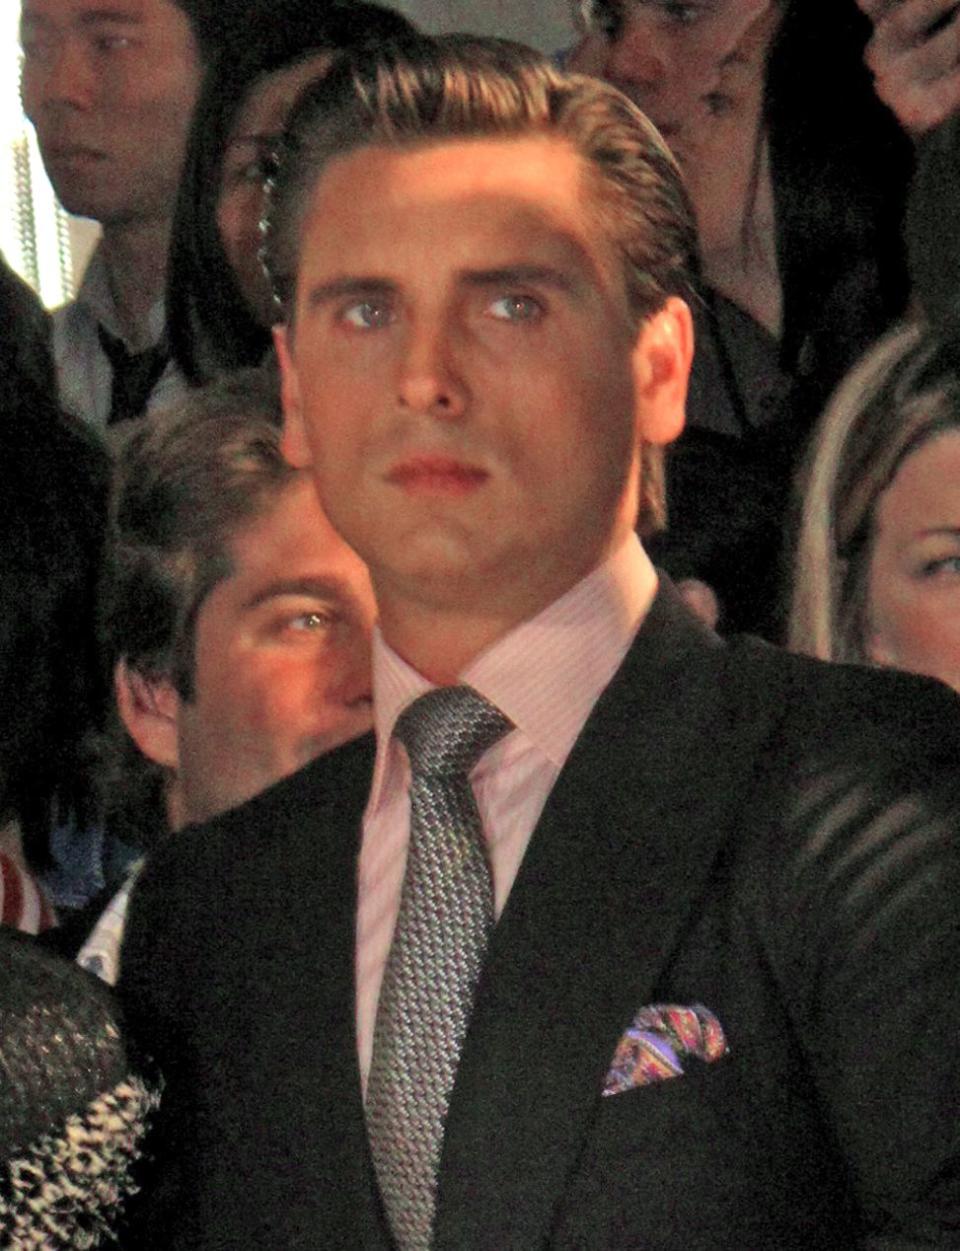 A hilarious photo of Scott Disick in black suit with pink inner T-shirt and tie to match